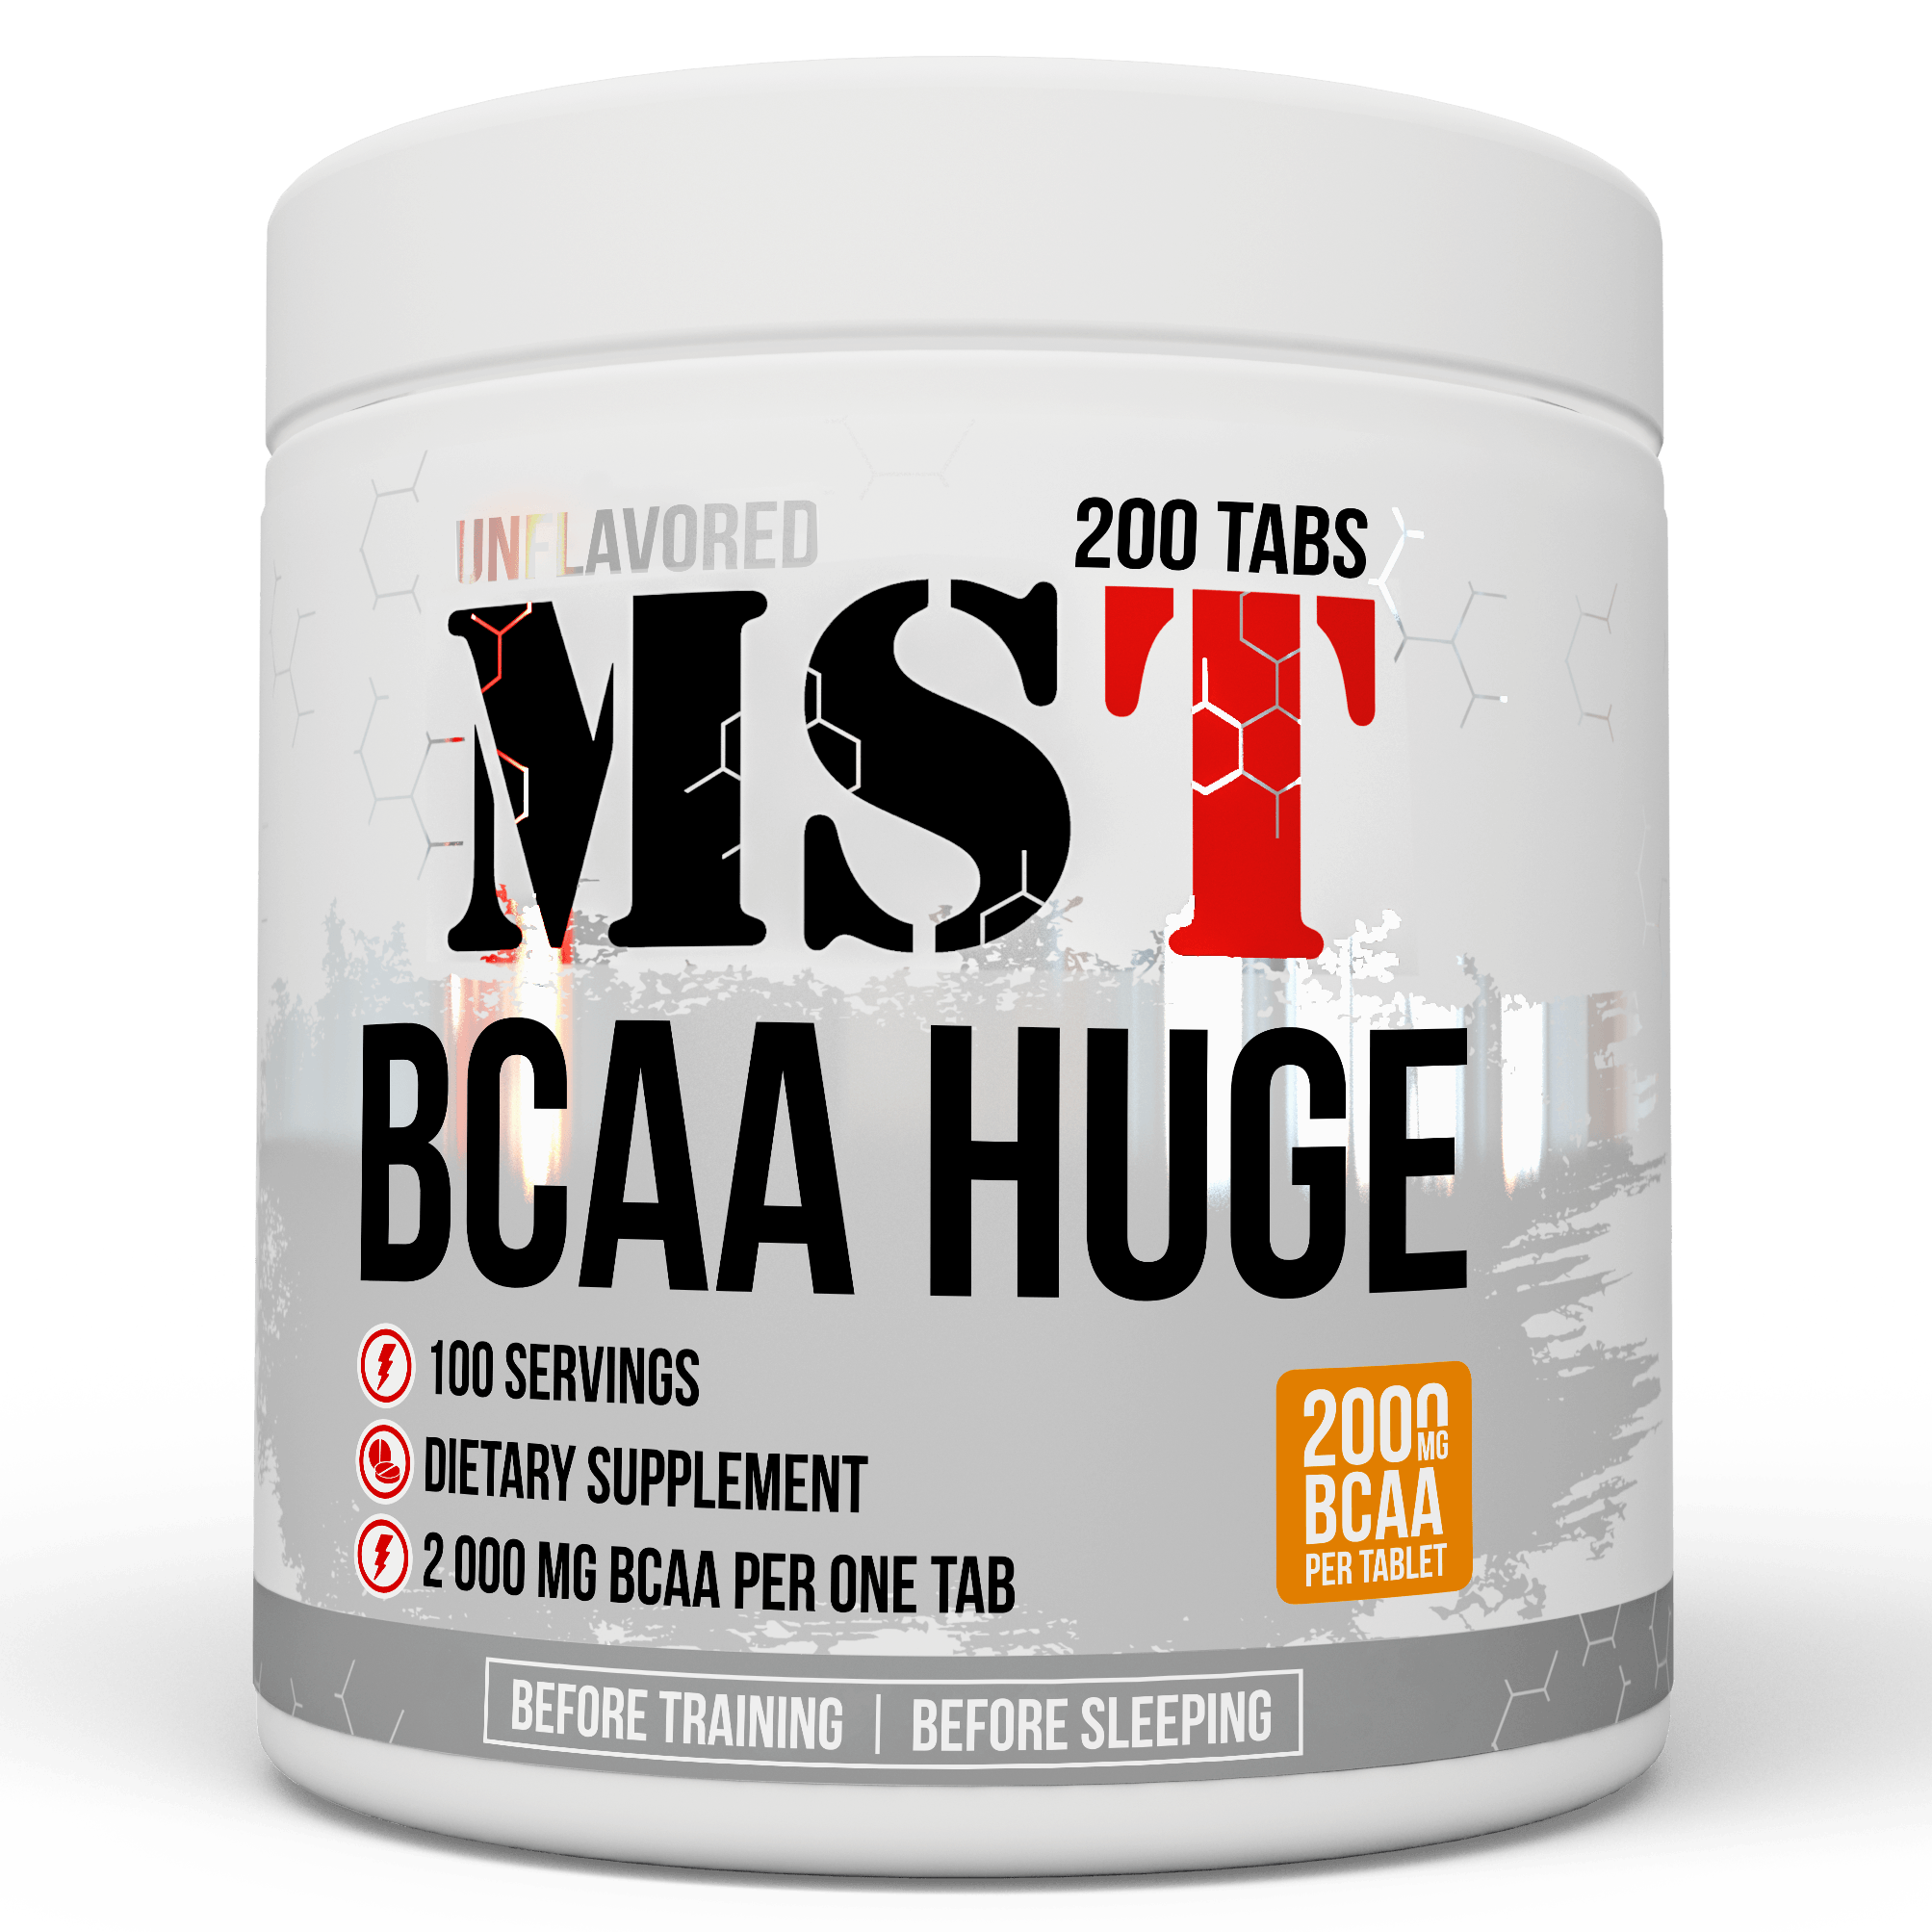 BCAA Huge, 200 pcs, MST Nutrition. BCAA. Weight Loss recovery Anti-catabolic properties Lean muscle mass 